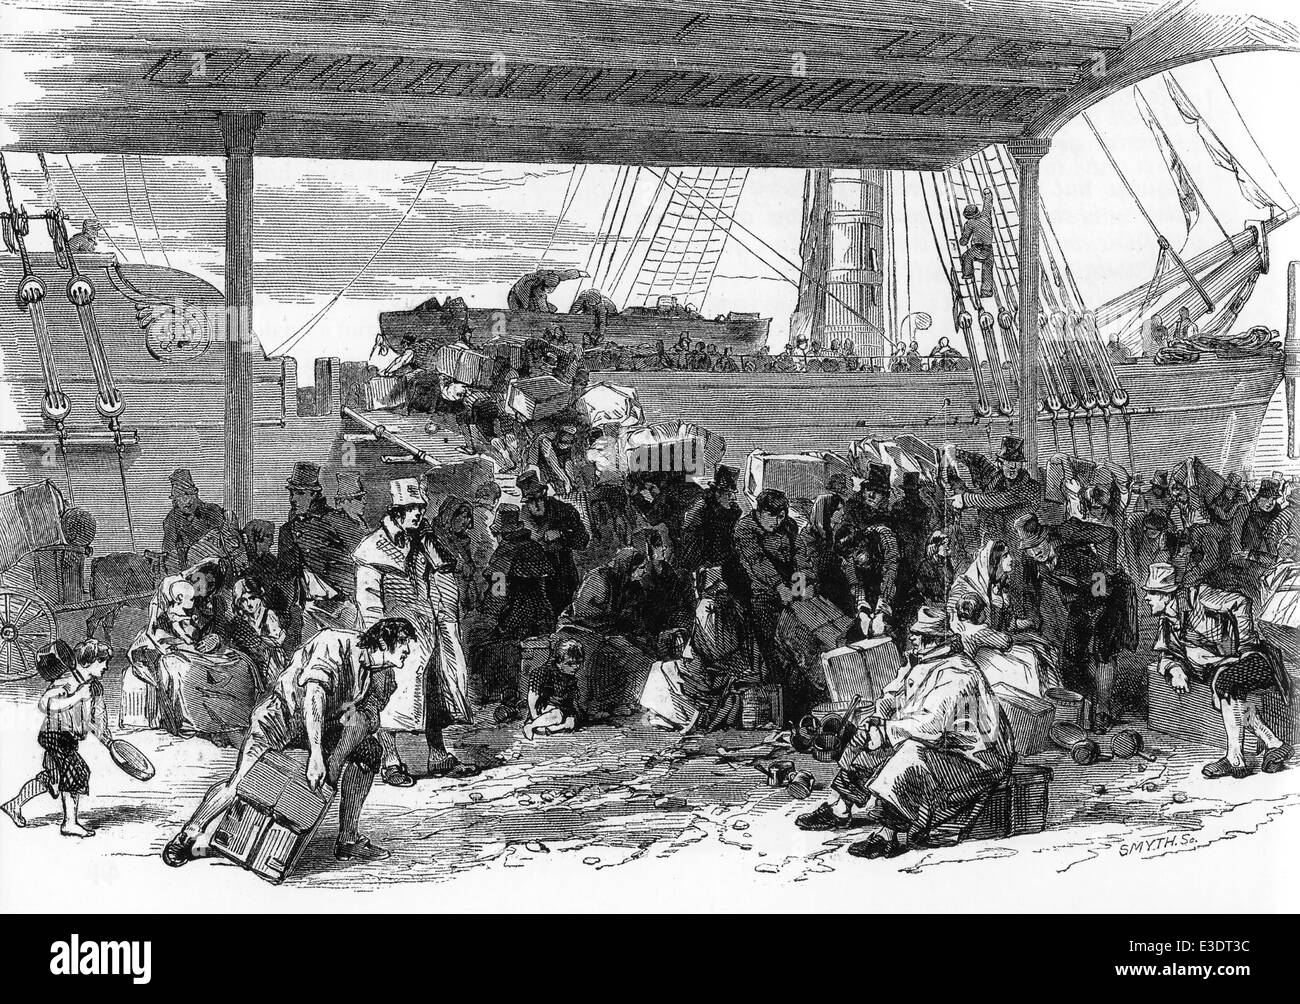 IRISH EMIGRATION from Waterloo Docks, Liverpool, engraving in The Illustrated London News, 6 July 1850 Stock Photo